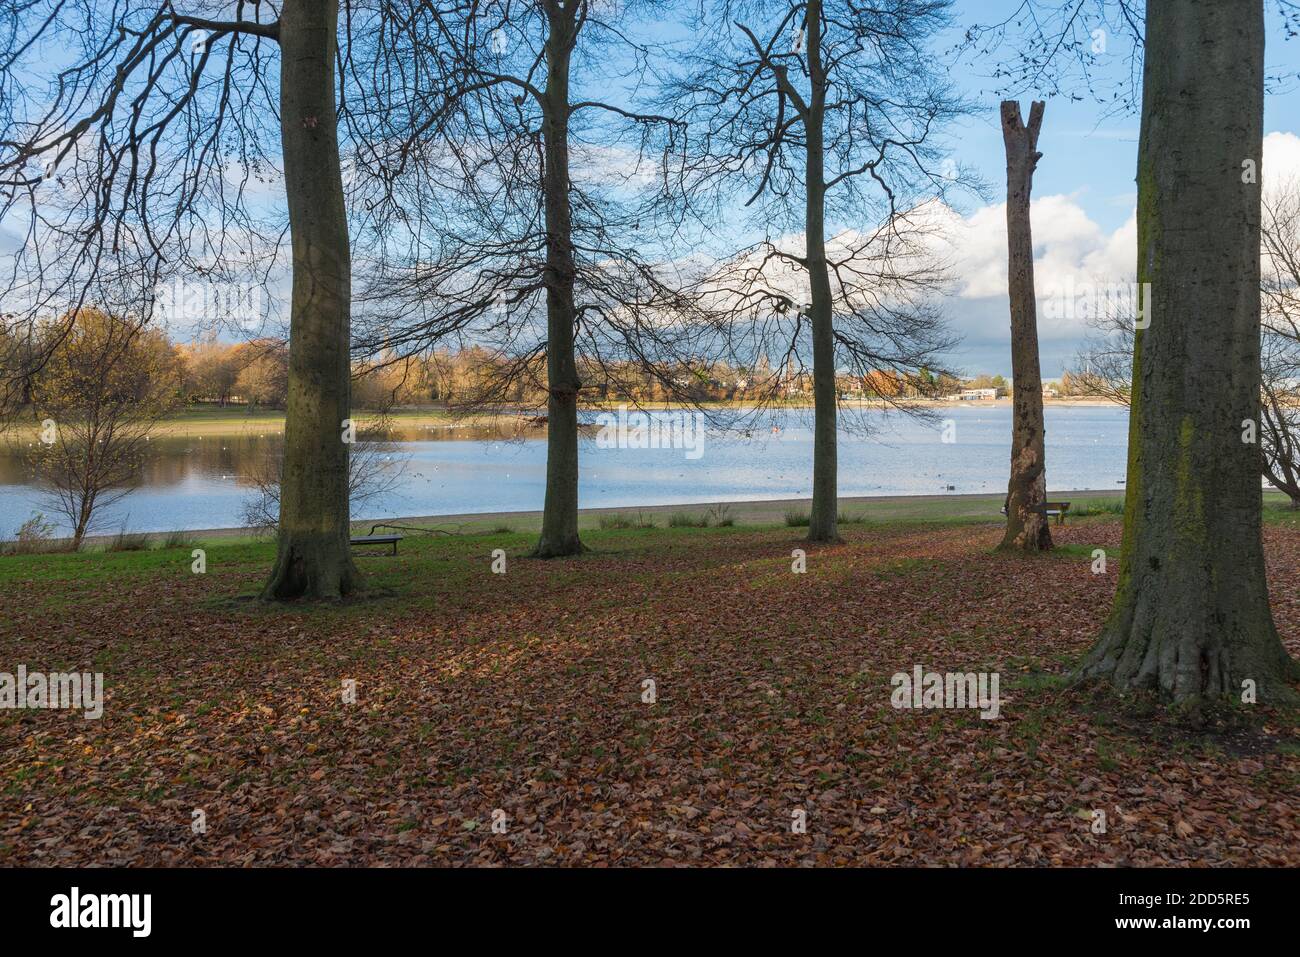 Edgbaston reservoir which is a feeder reservoir for the canal network in Birmingham, UK Stock Photo